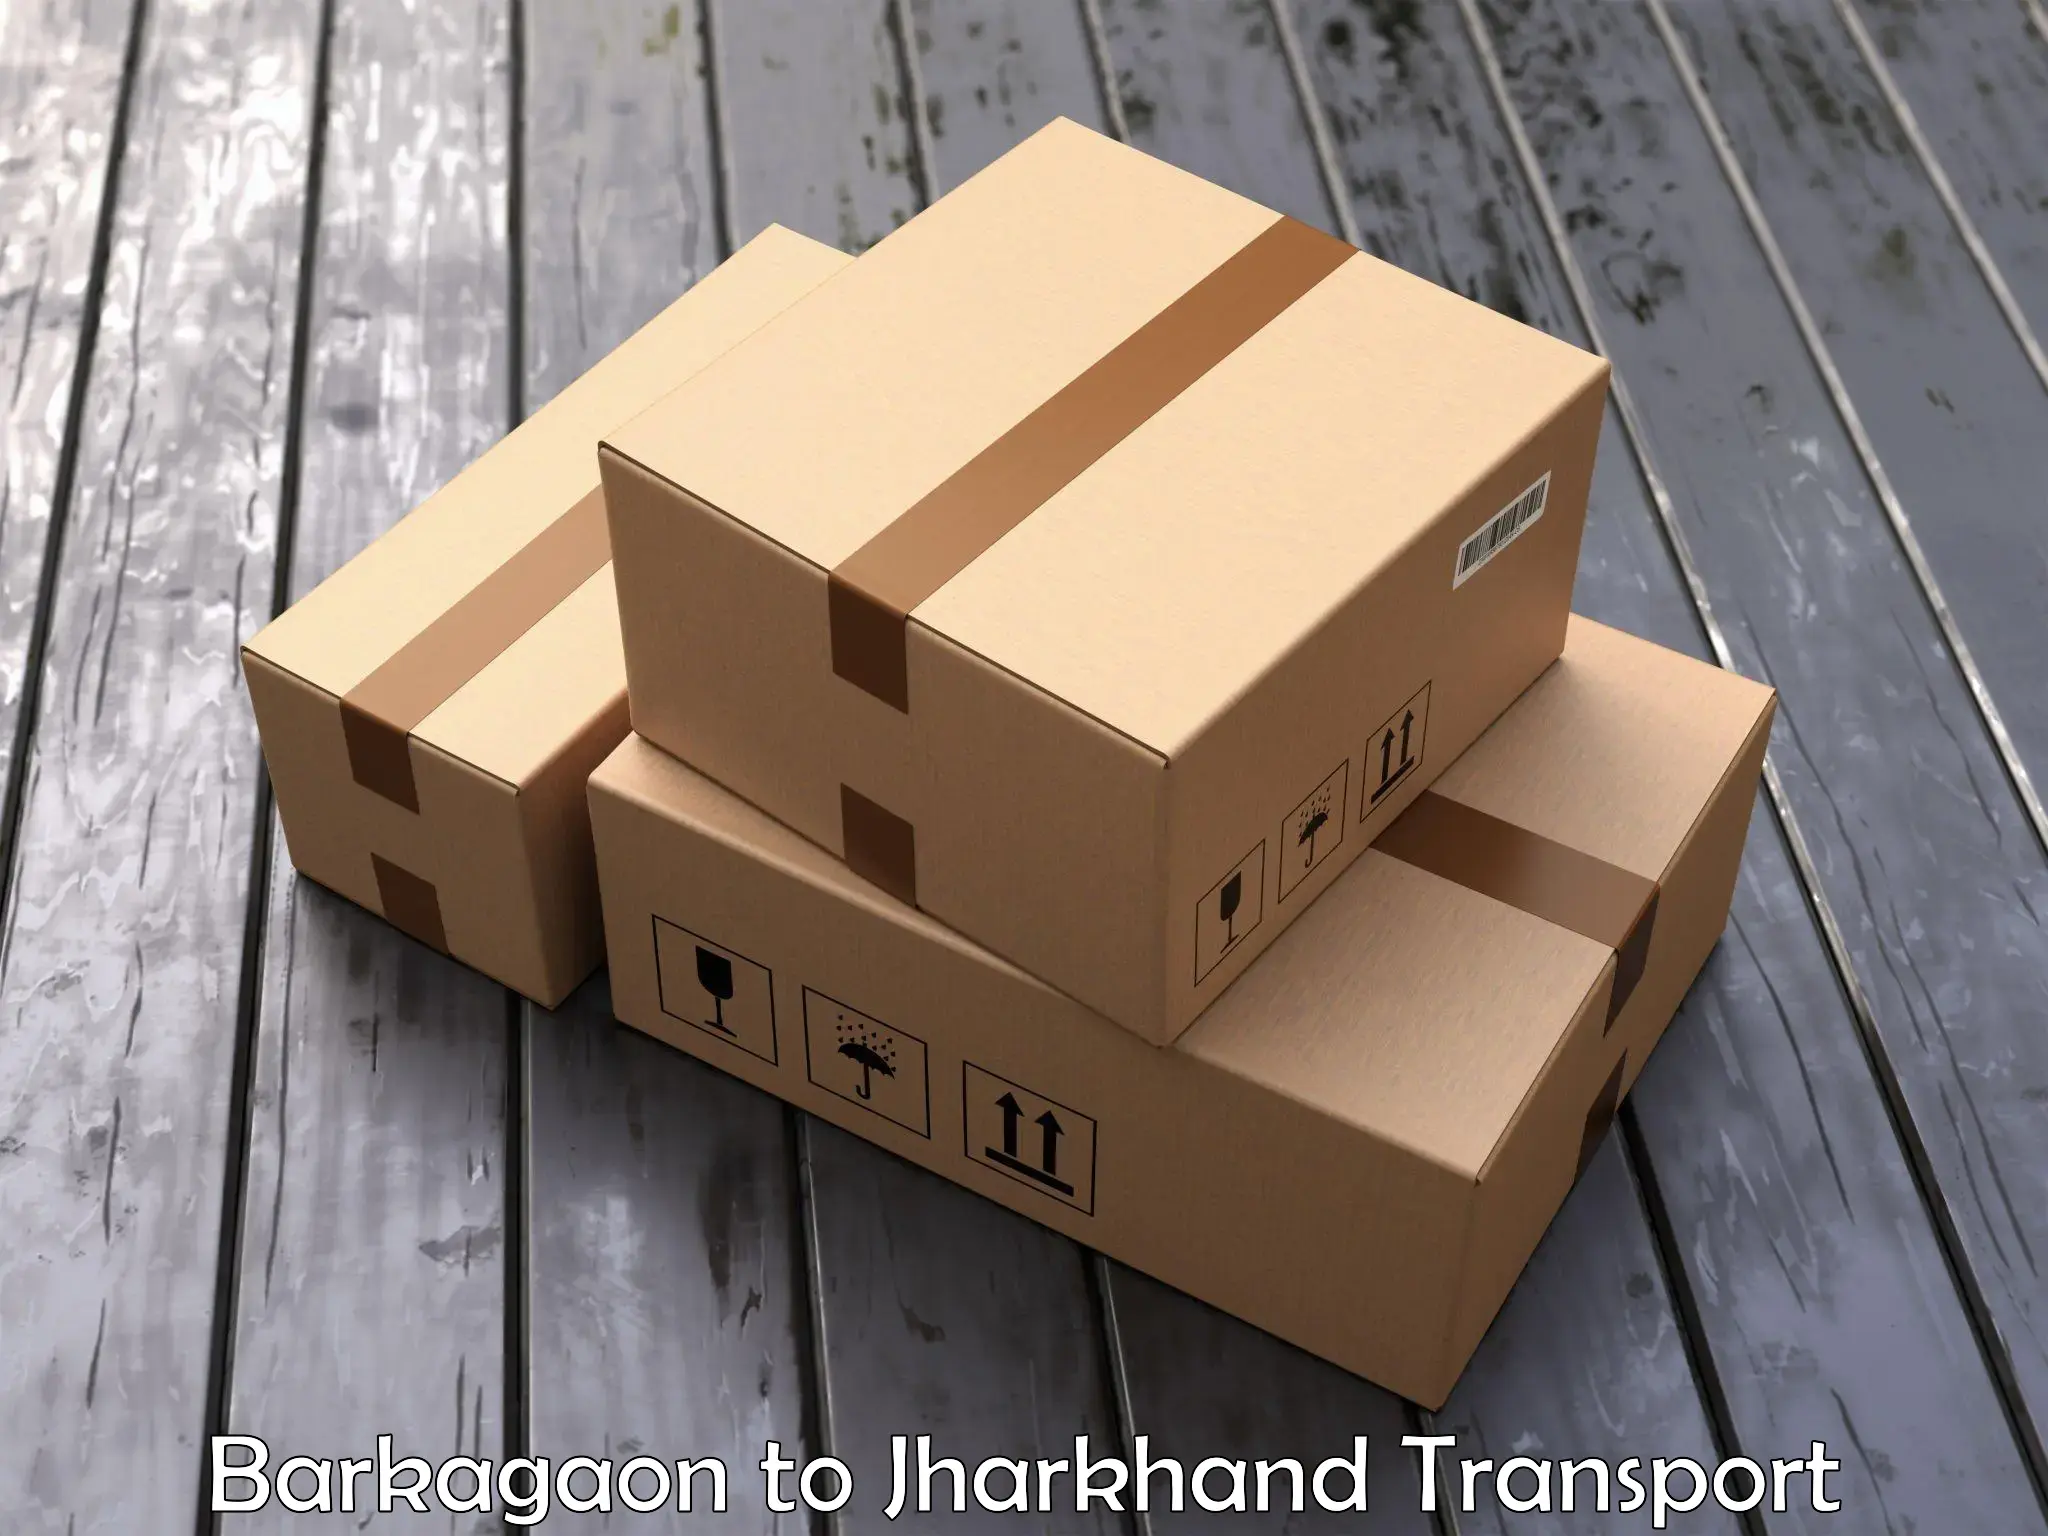 Two wheeler parcel service Barkagaon to Jharkhand